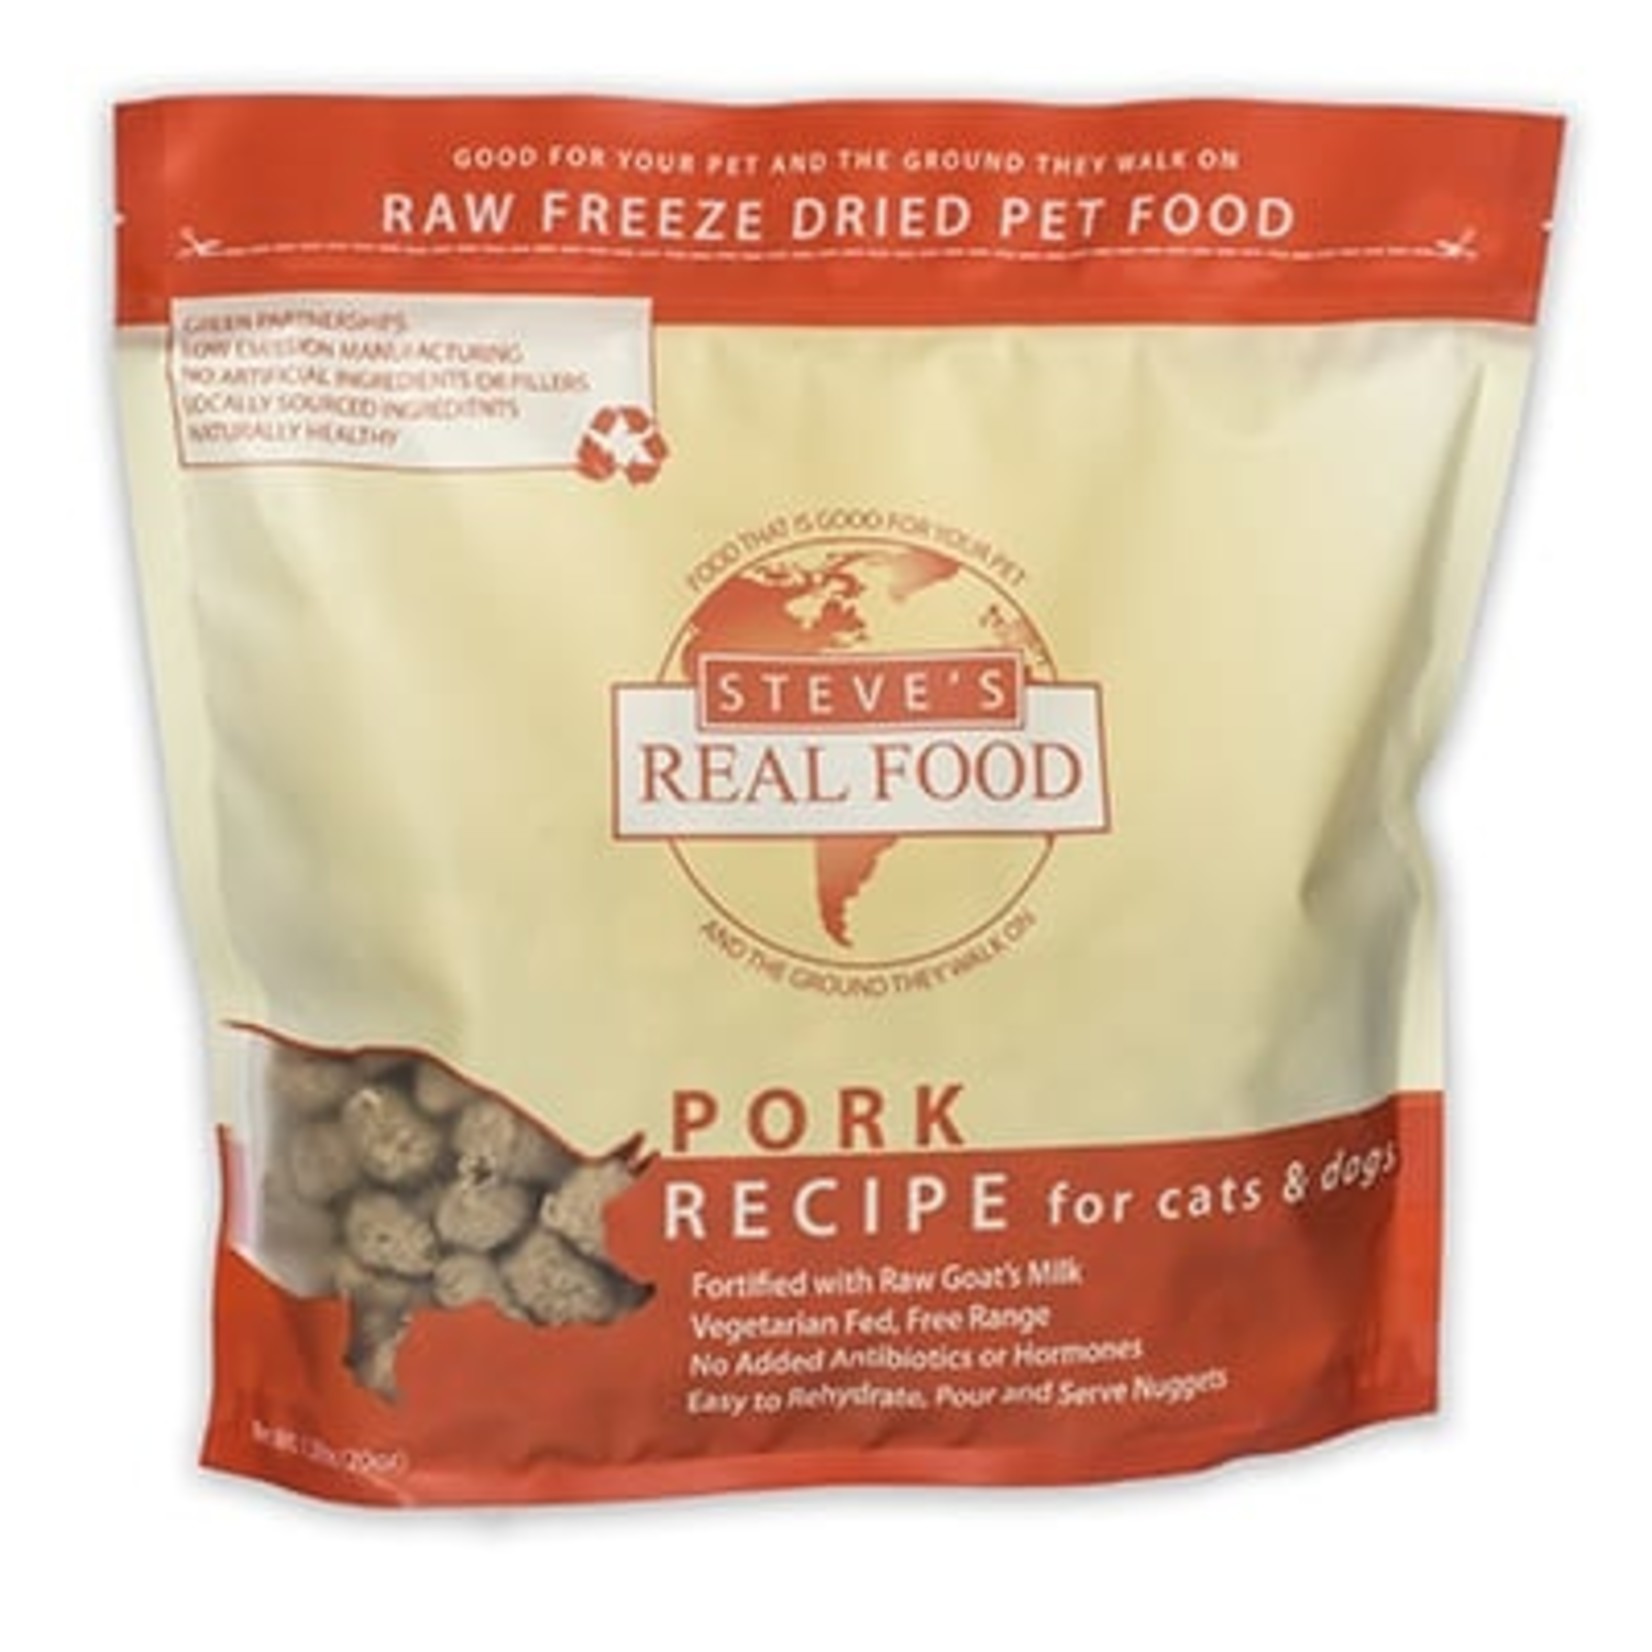 Steve's Real Food Steve's Real Food Raw Freeze Dried Pork Recipe for Cats & Dogs